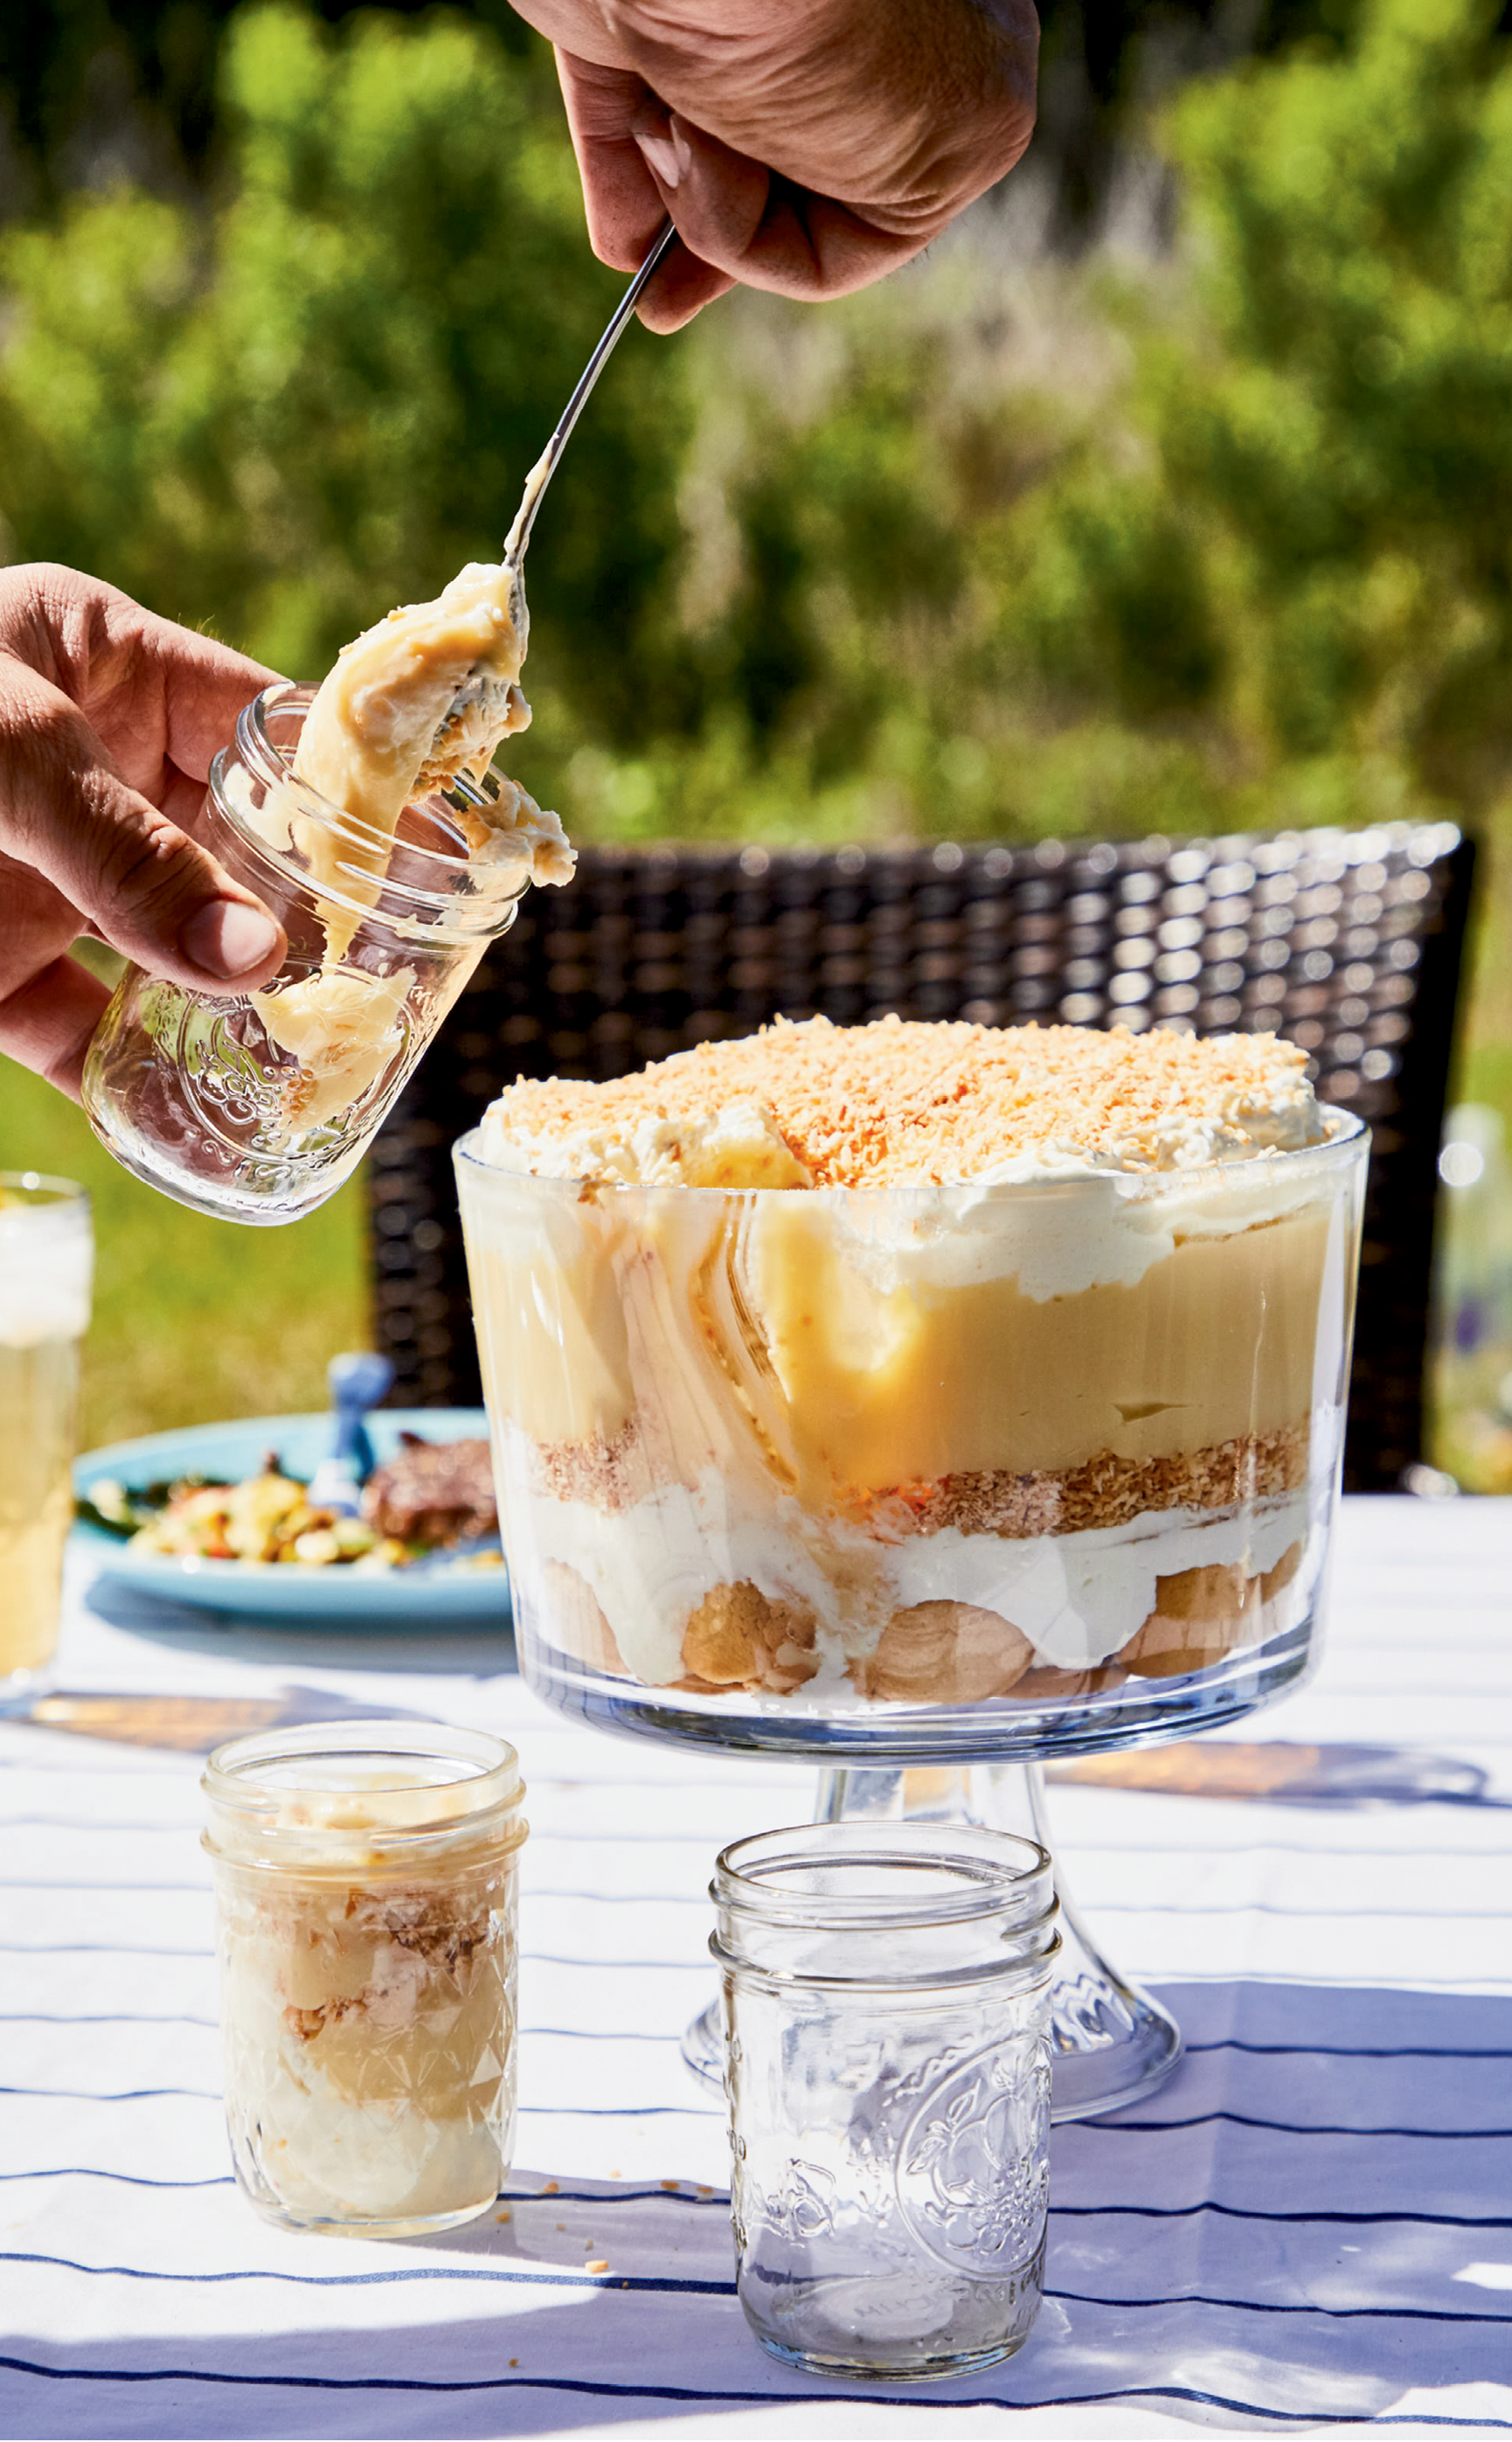 Tropical Twist: Bands of coconut pudding and toasted coconut mingle with whipped cream and vanilla wafers in this luscious spin on the classic banana pudding dessert